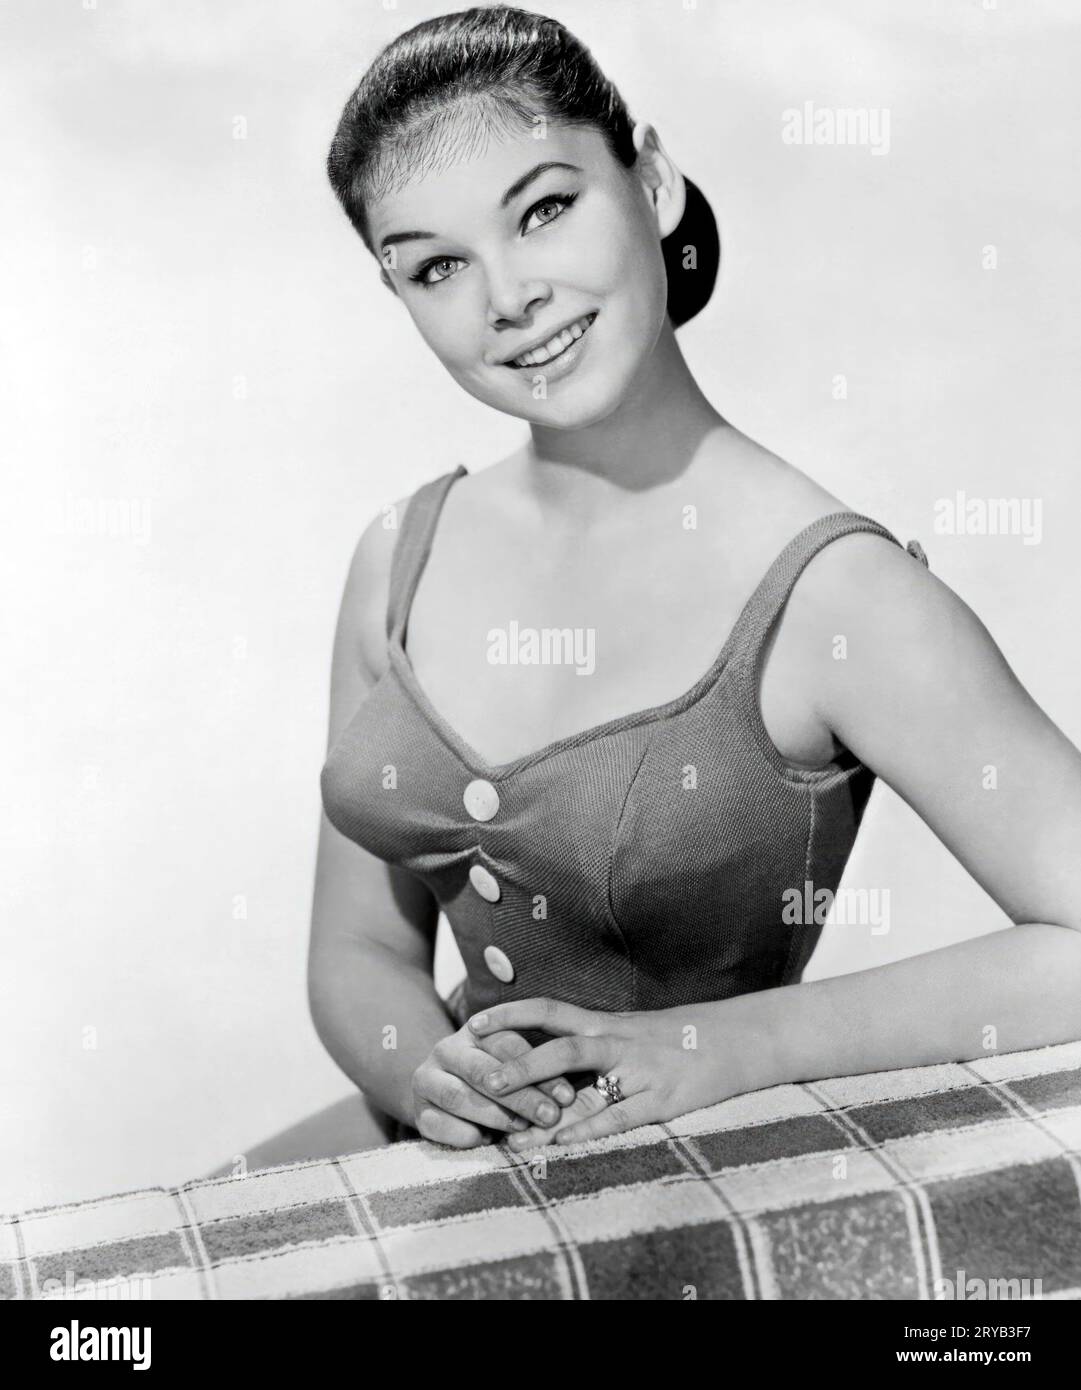 YVONNE CRAIG in THE YOUNG LAND (1959), directed by TED TETZLAFF. Credit: C.V. Whitney Pictures / Album Stock Photo